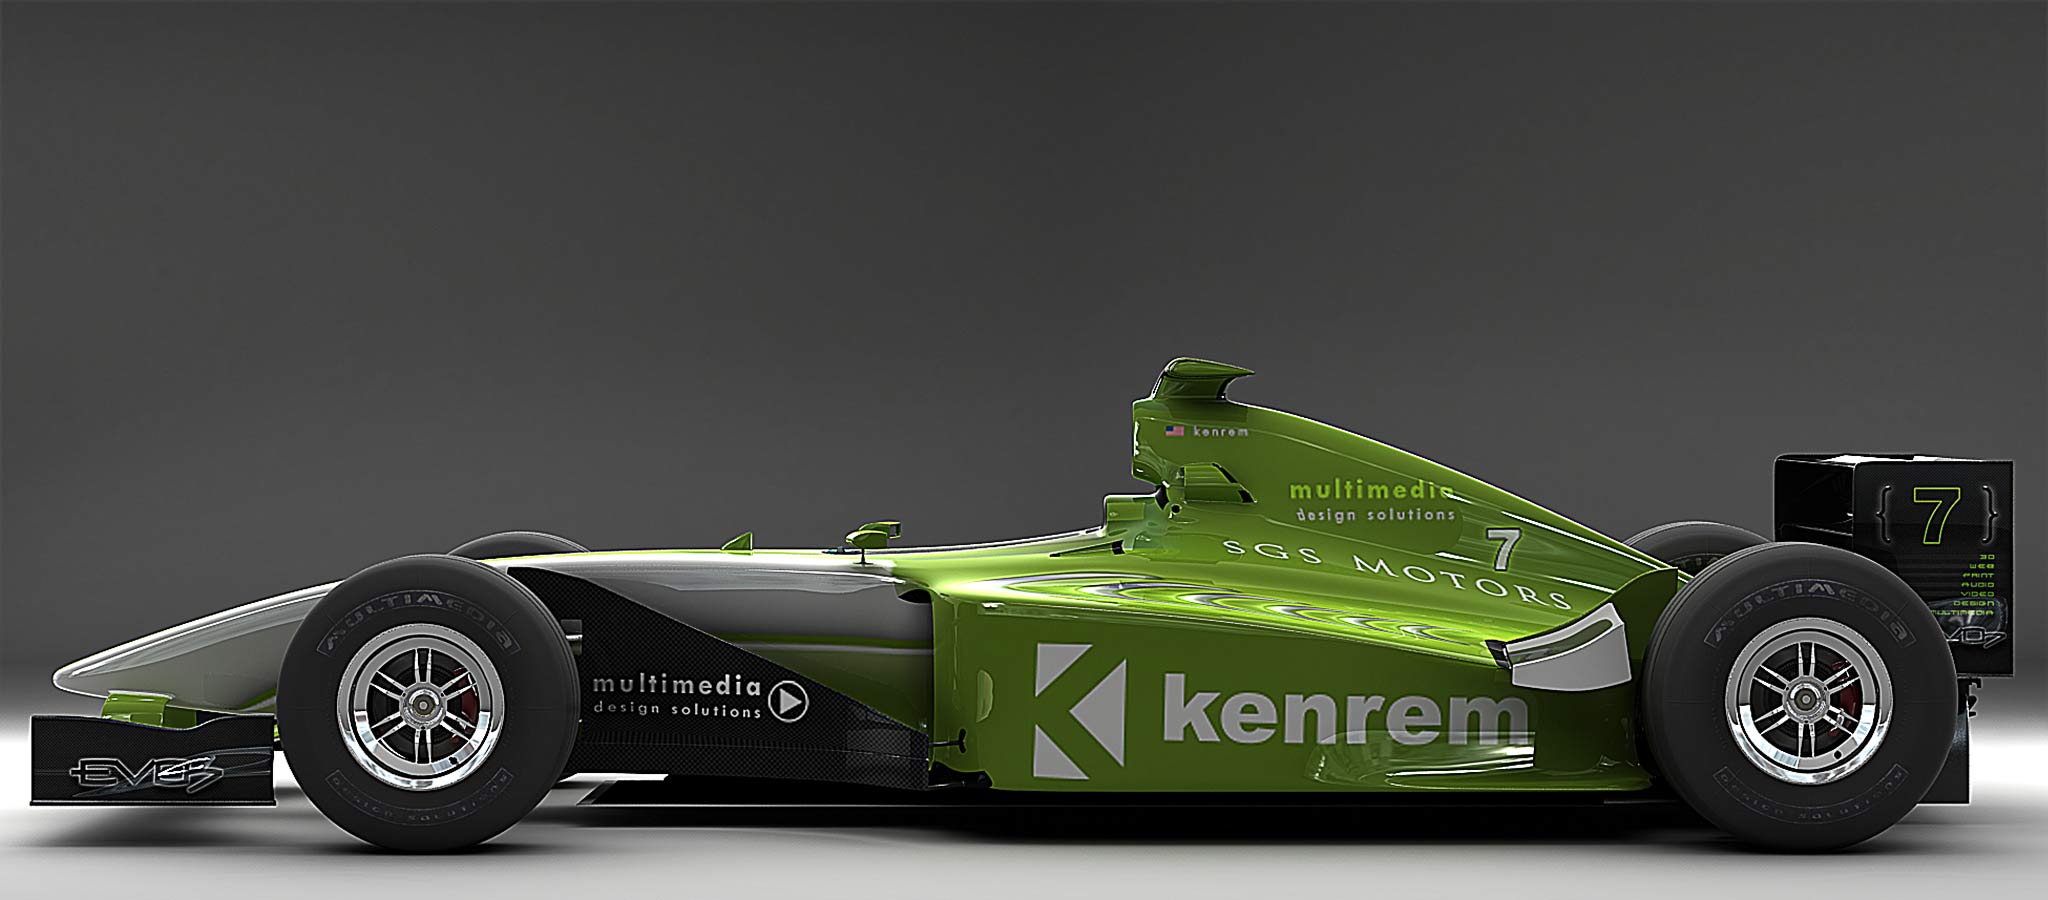 A 3D model and render of a 1998 formula 1 race car. This image is used as a promotional piece for my web site kenrem dot com.